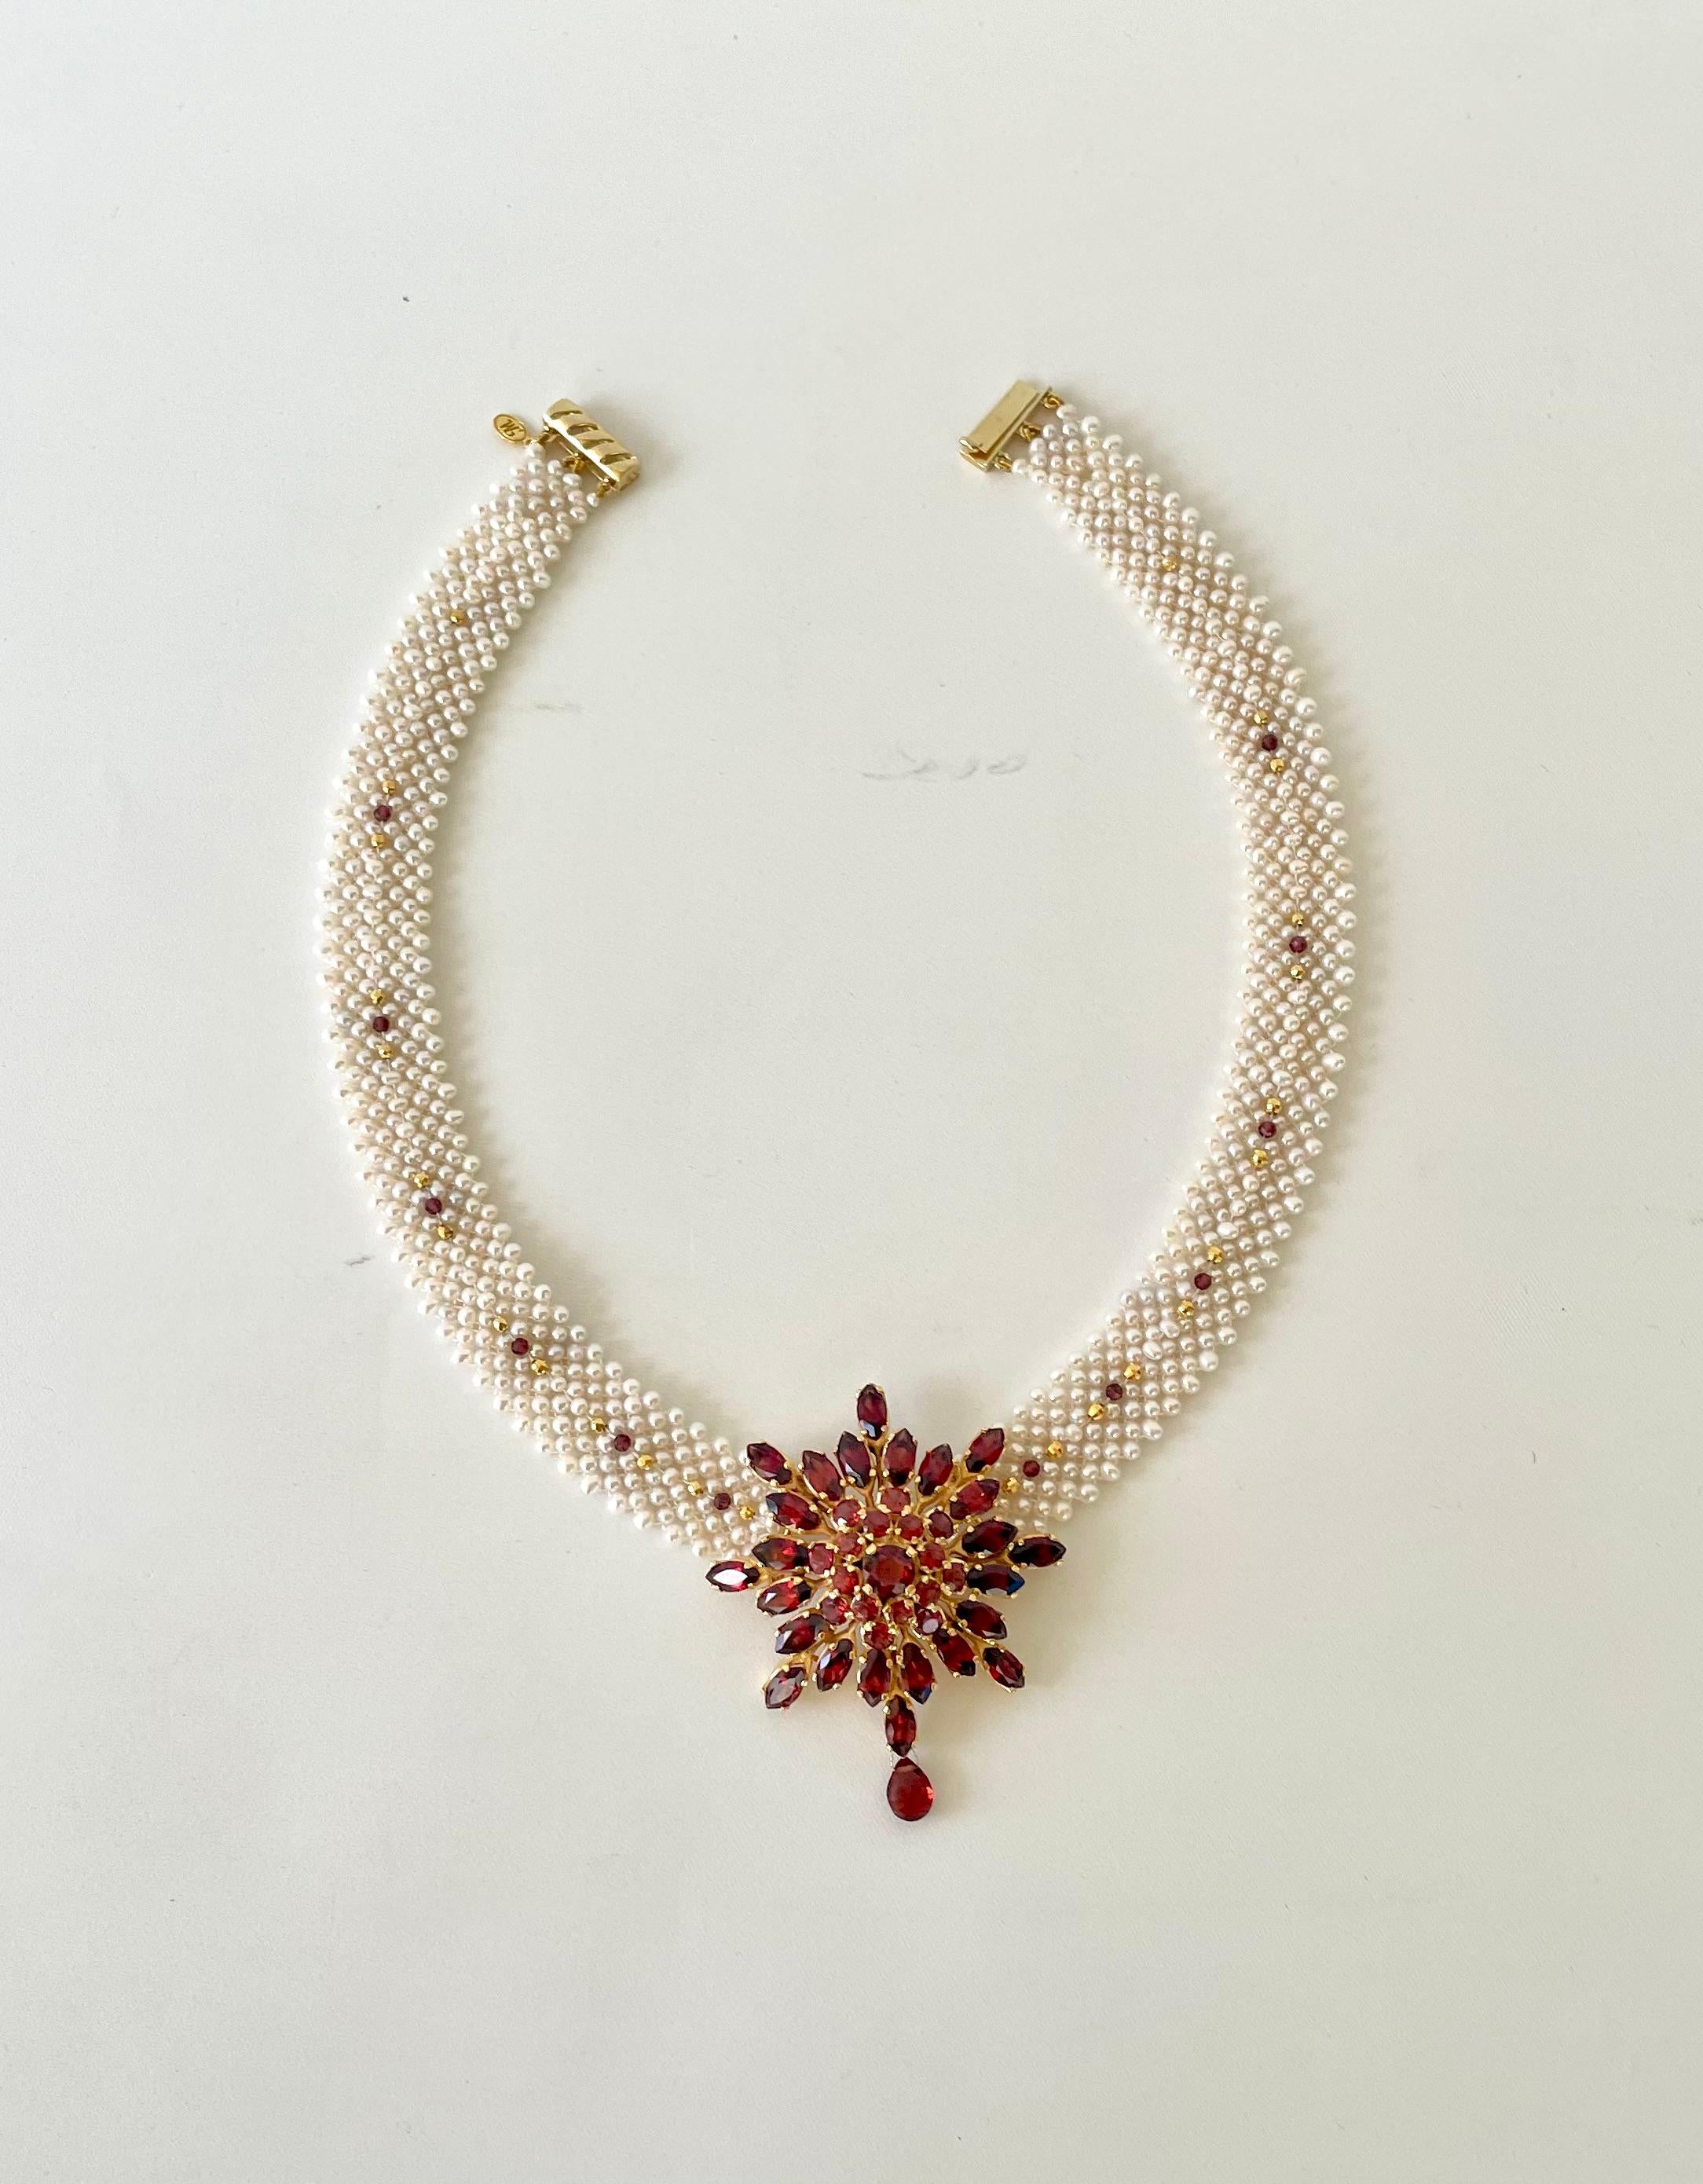 Classic Marina J  hand-woven necklace with beautiful lace-like design featuring bright Garnet beads and 14K Yellow Gold-plated beads. This necklace is built around gorgeous Vintage Sterling Silver 14K Yellow Gold-plated  bright vintage Garnet